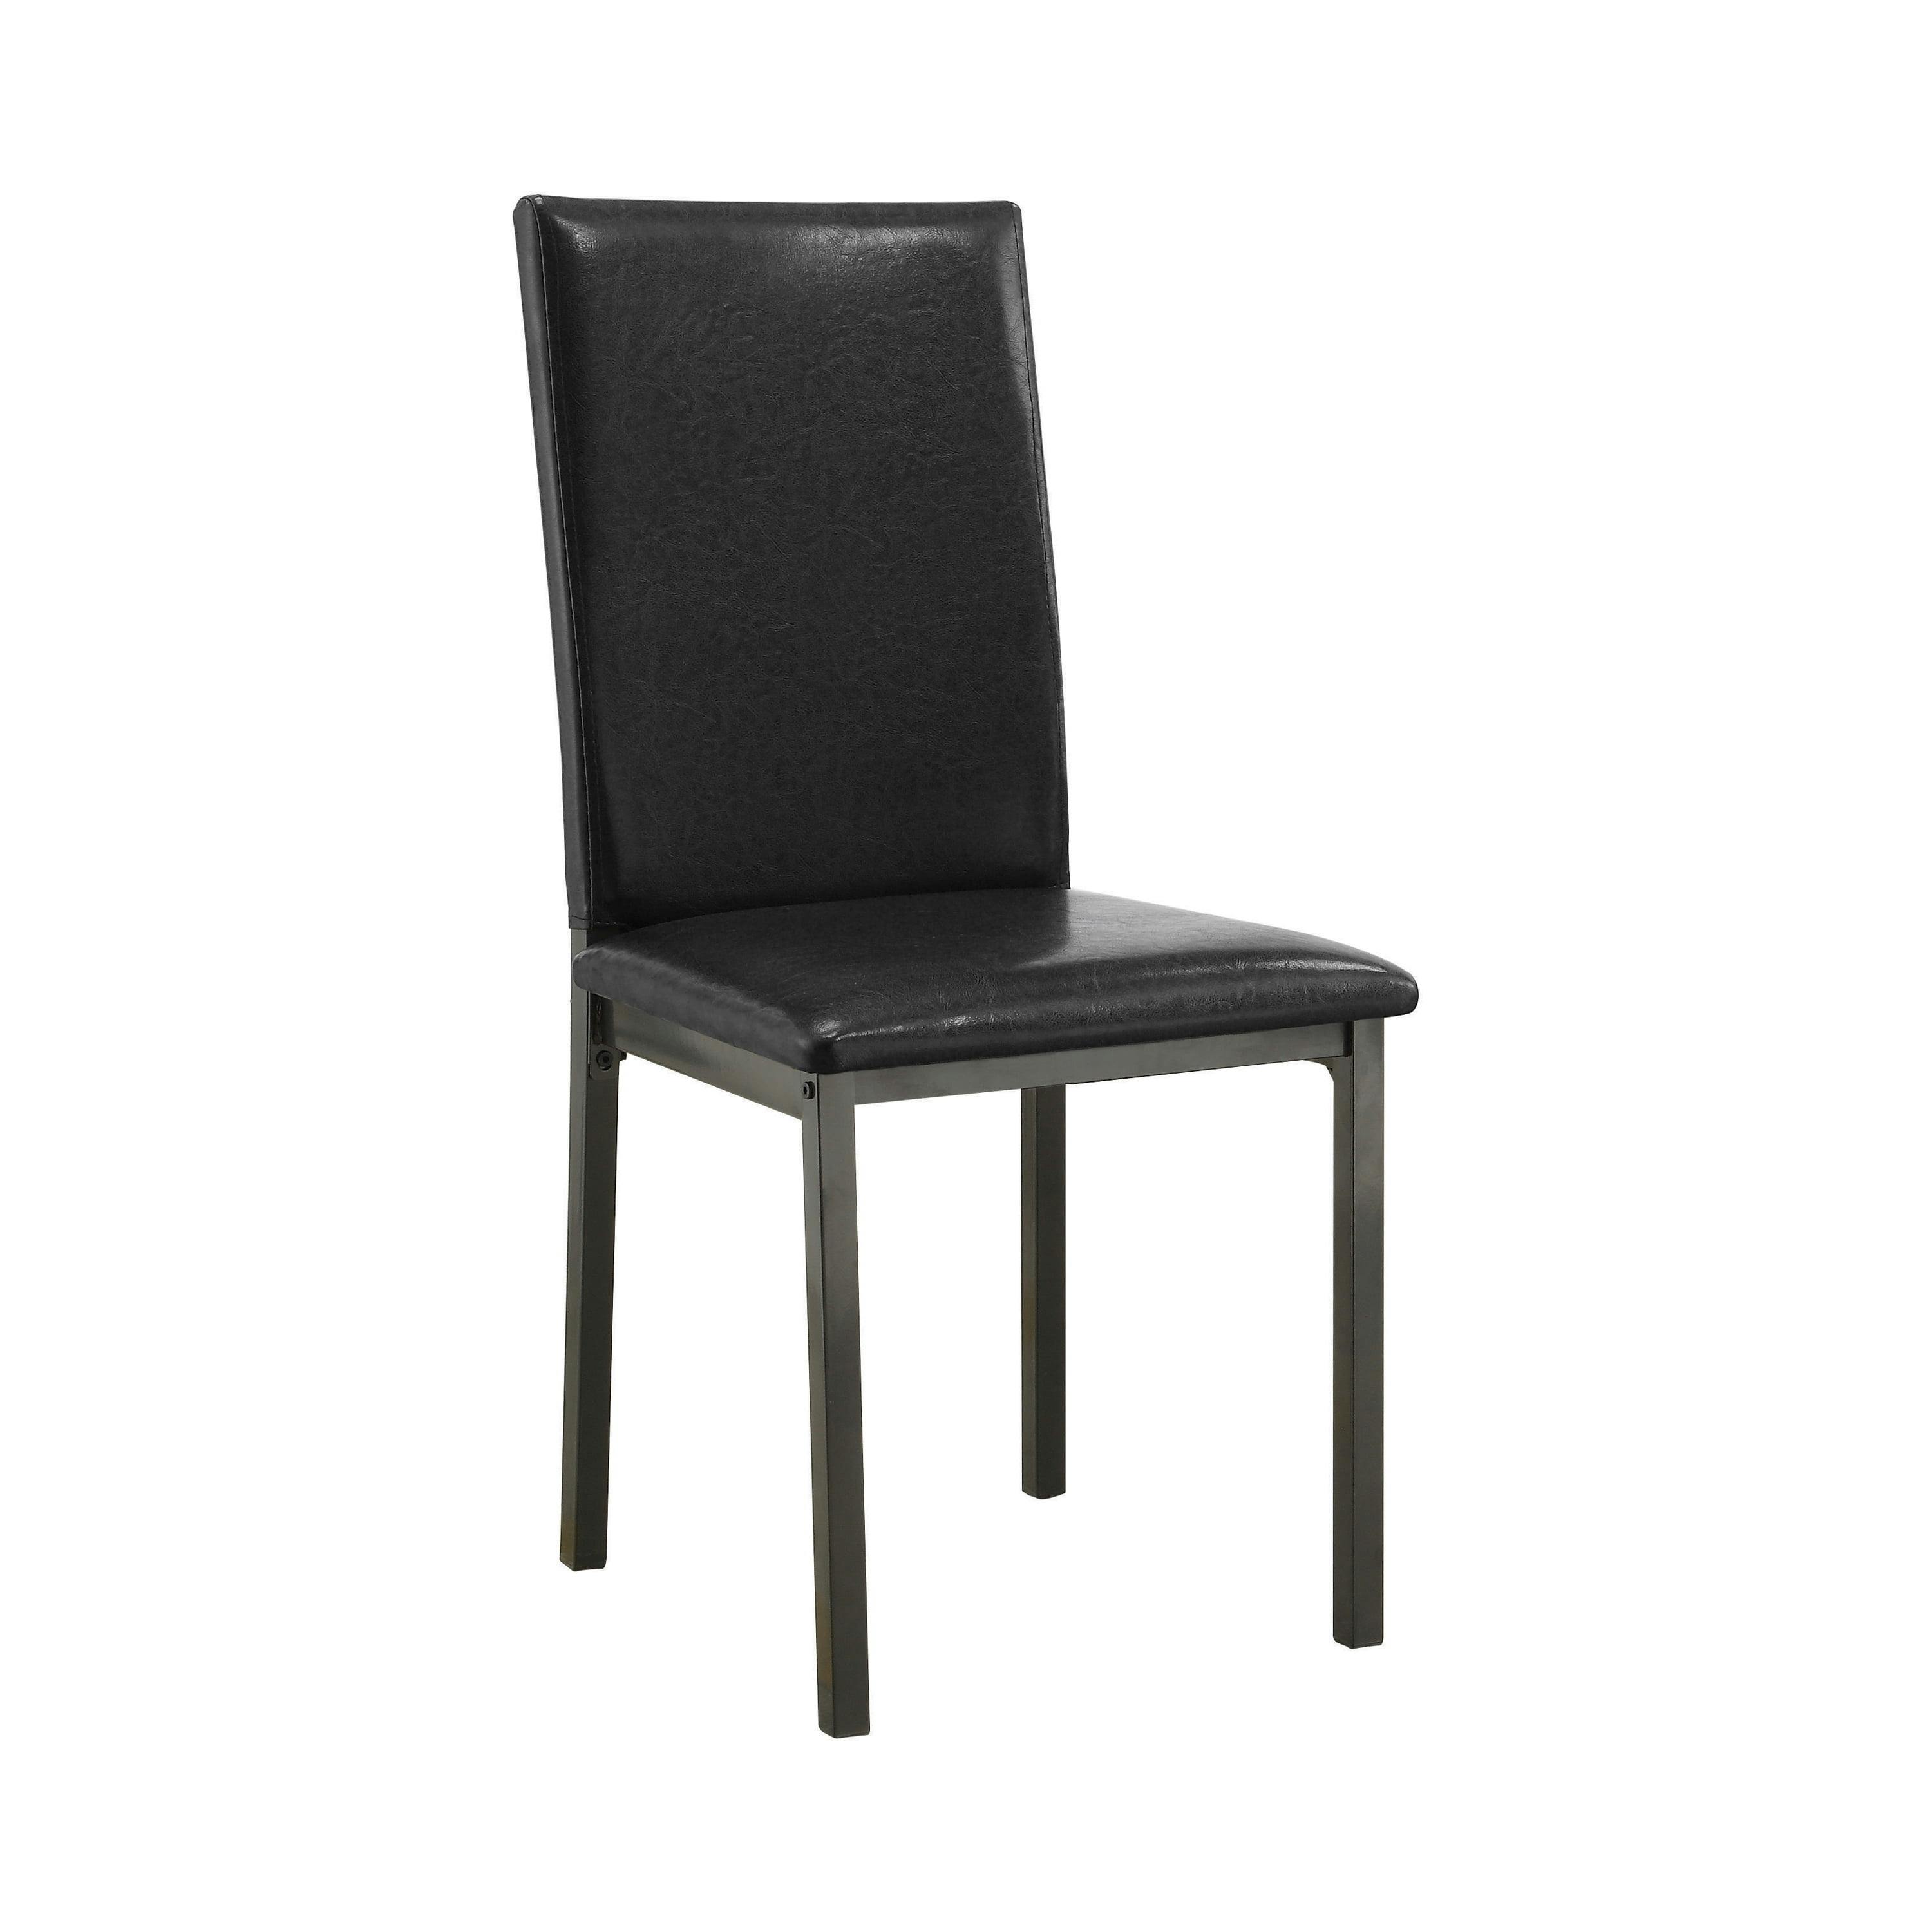 Transitional Black Faux Leather Upholstered Side Chair with Metal Accents